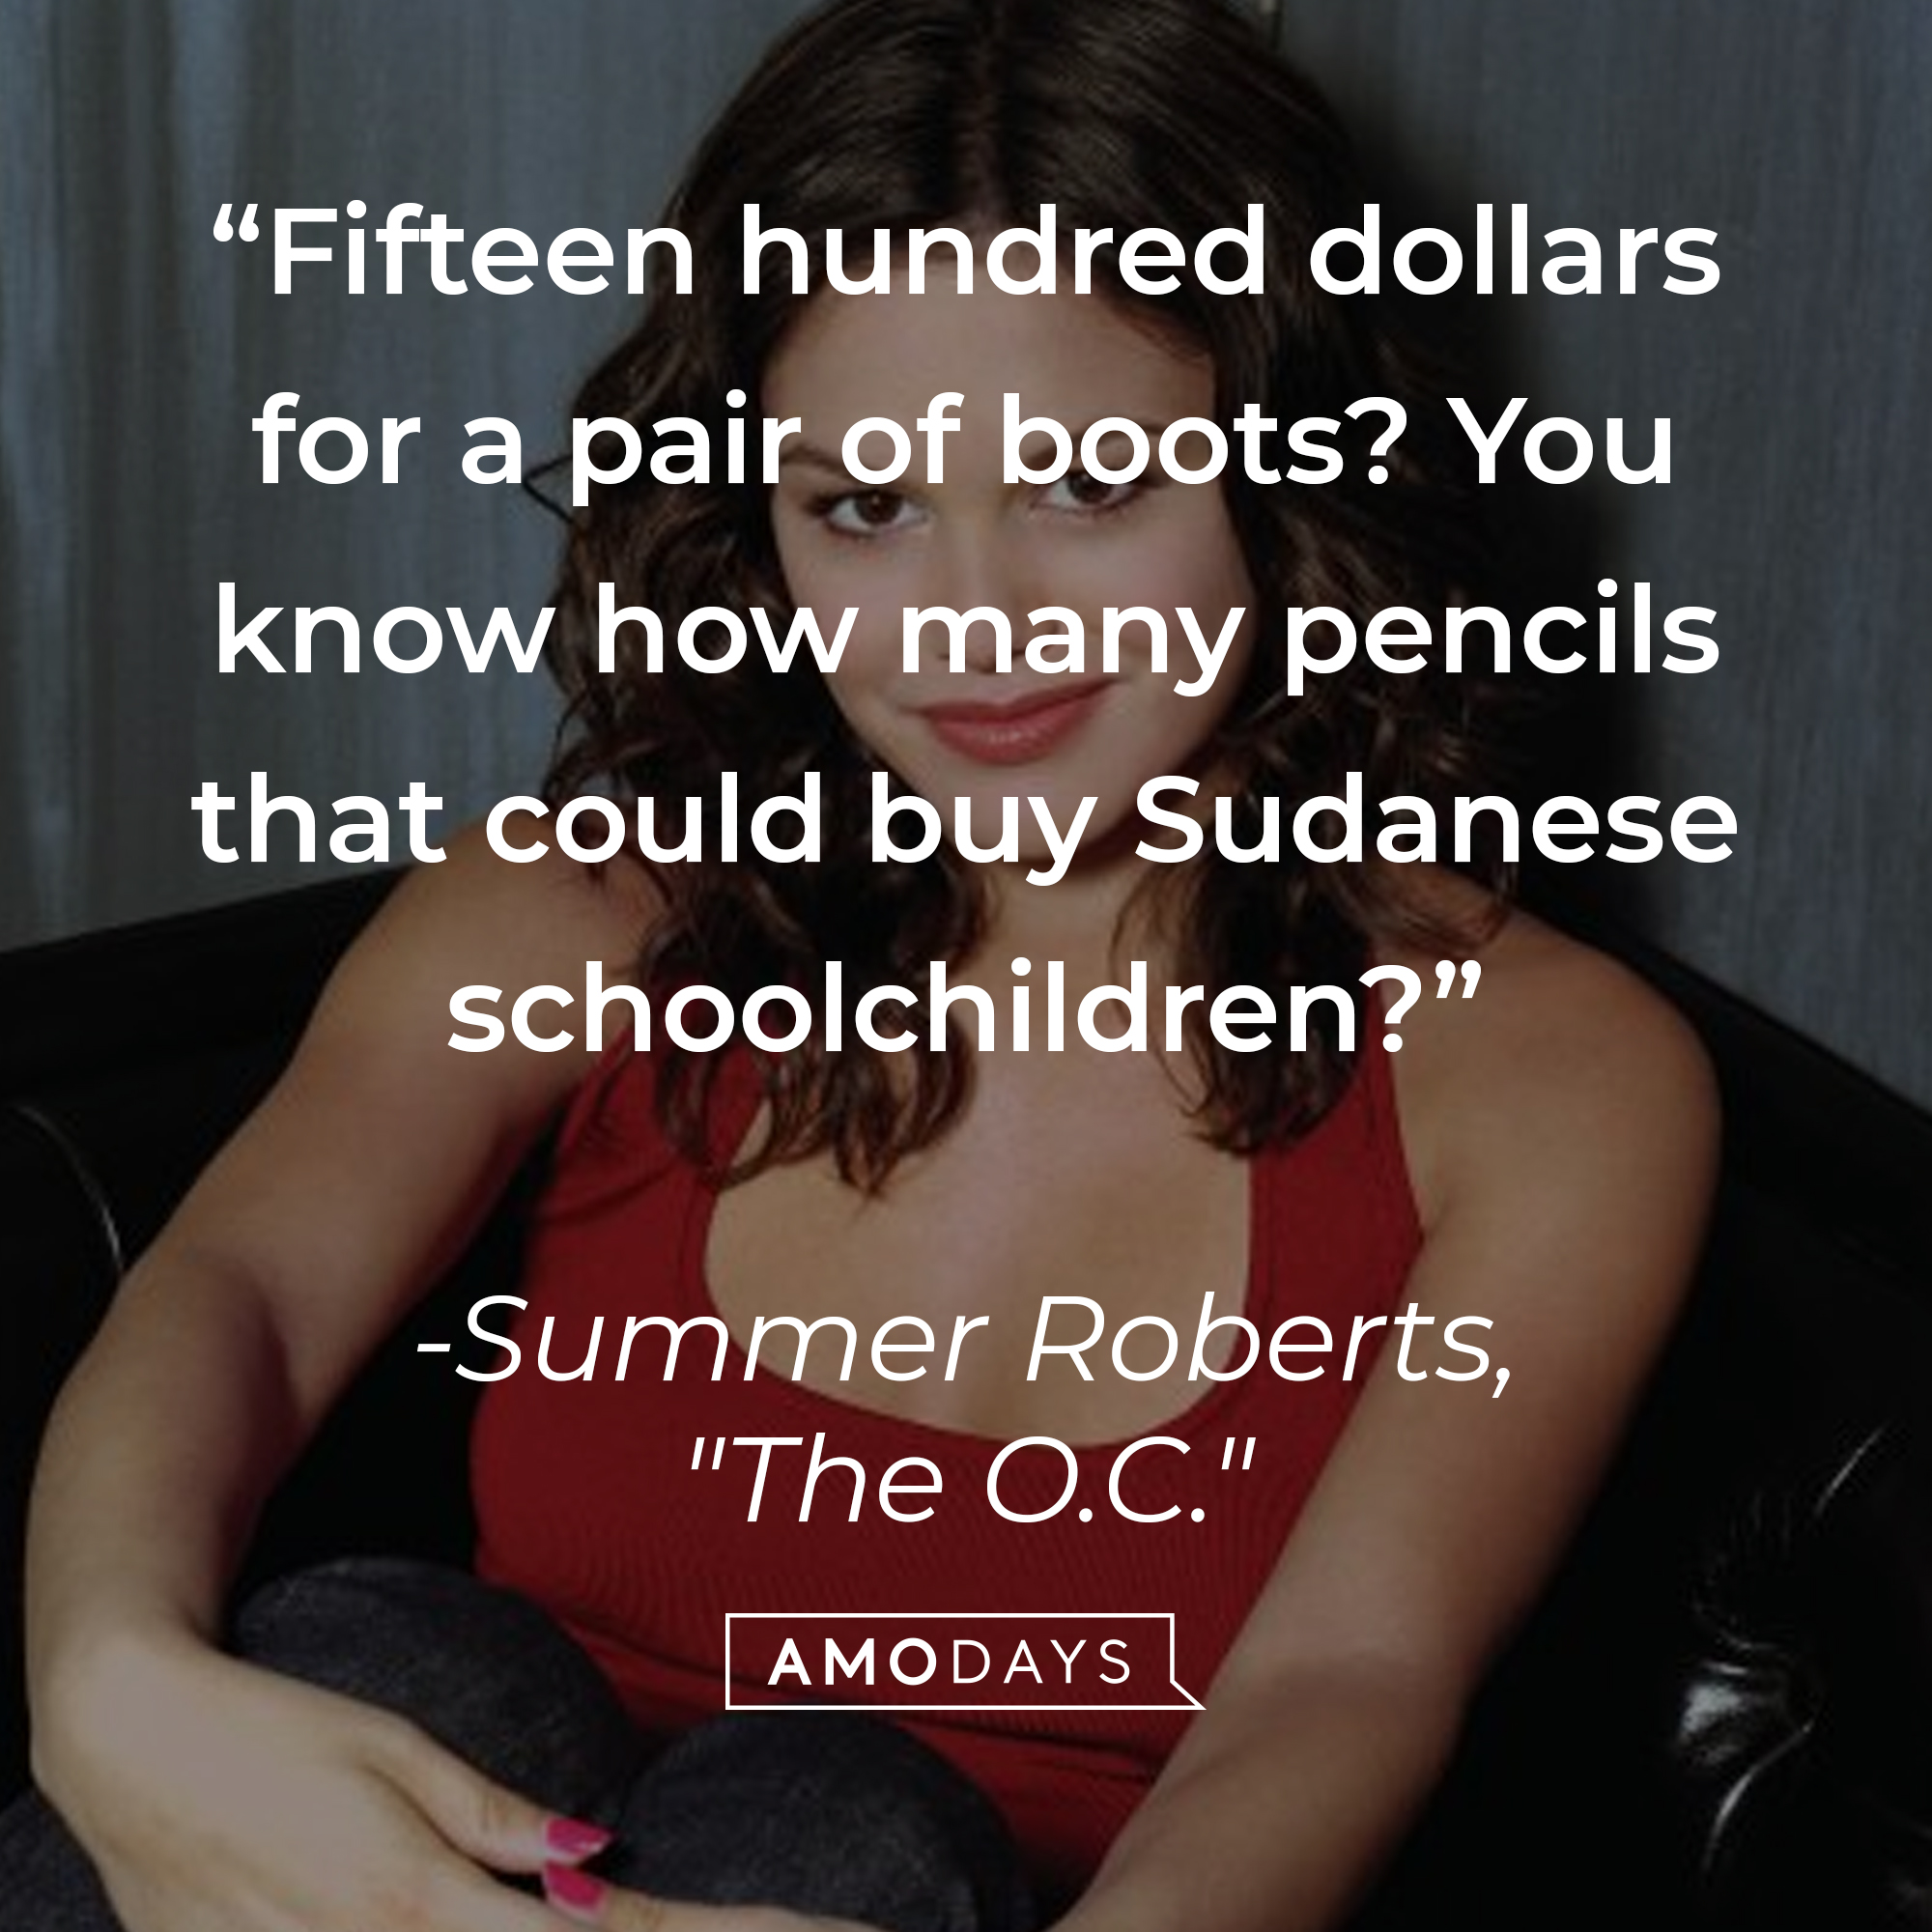 Summer Roberts' quote: "Fifteen hundred dollars for a pair of boots? You know how many pencils that could buy Sudanese schoolchildren?" | Source: Facebook.com/TheOC